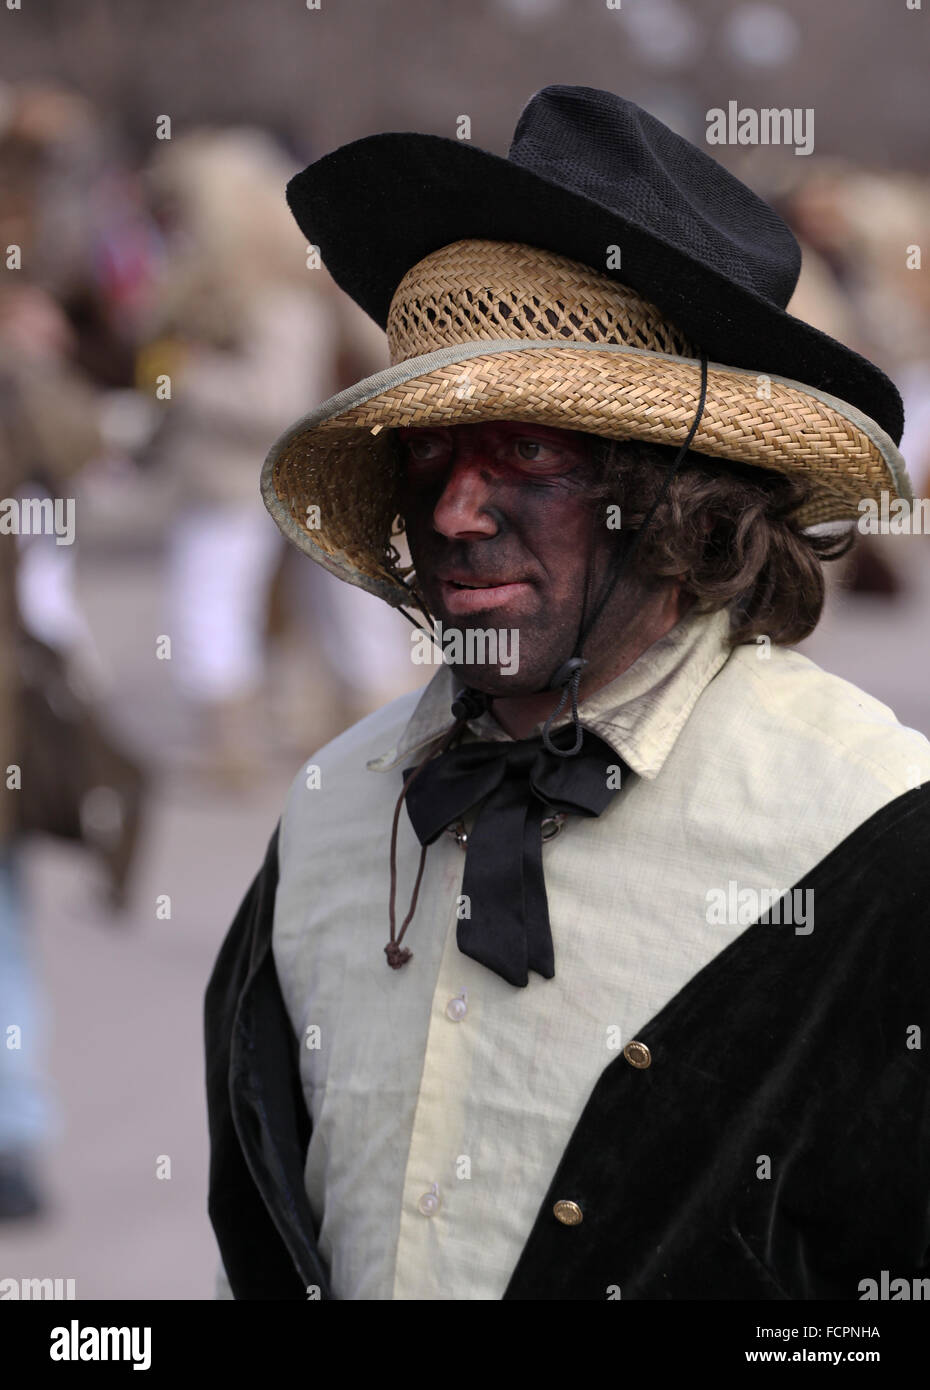 Bulgaria - jan 31, 2015: Man in traditional masquerade costume is seen at the the International Festival of the Masquerade Games Stock Photo